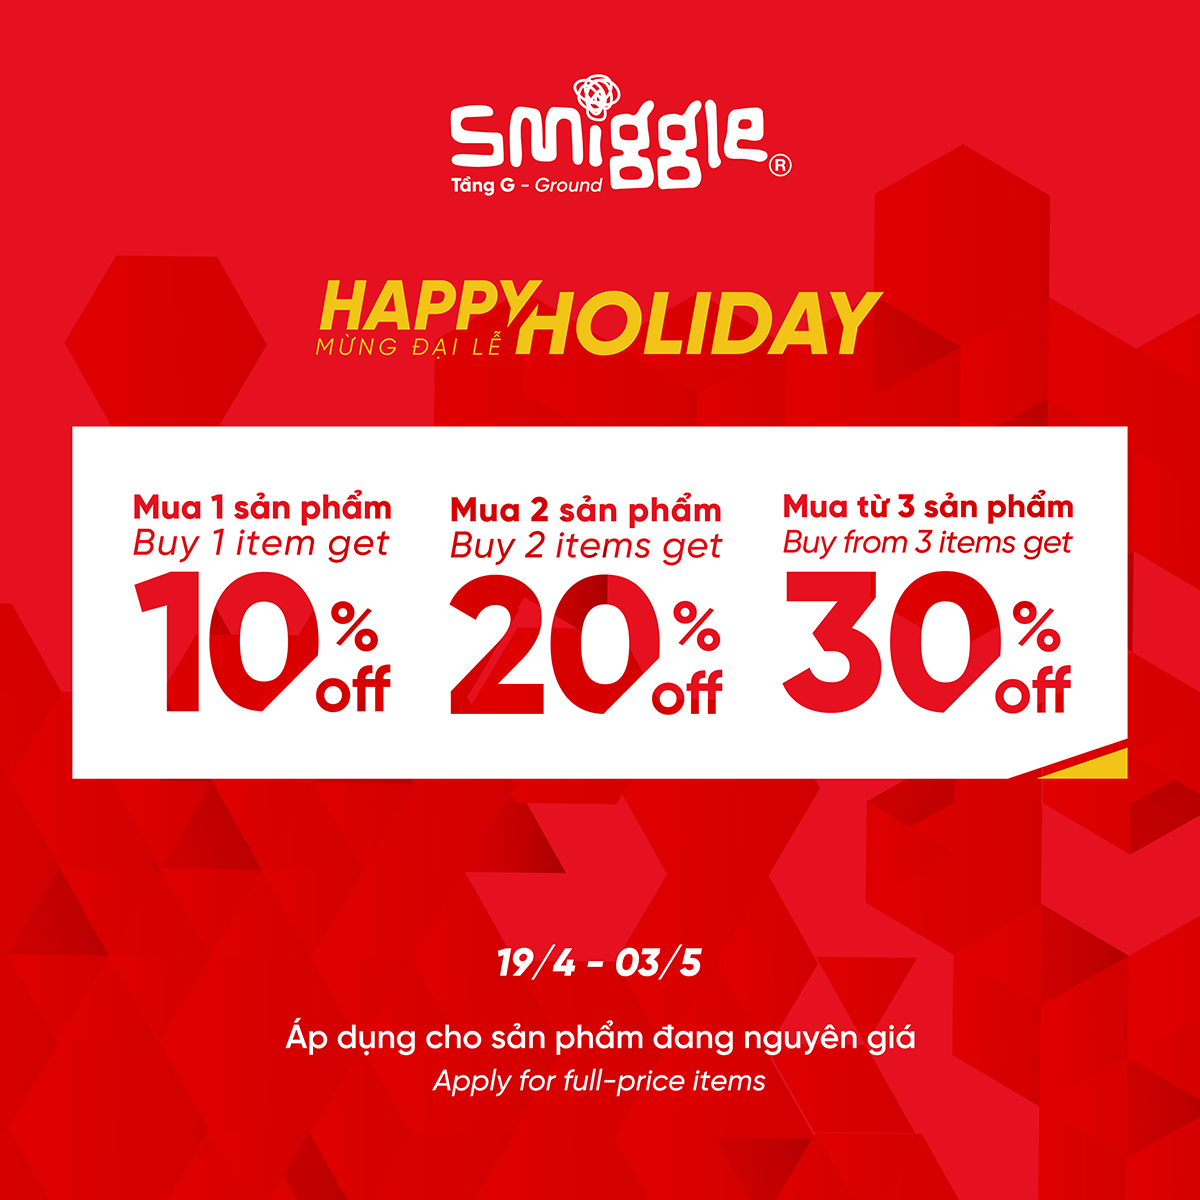 BIRKENSTOCK AND SMIGGLE - HAPPY HOLIDAY - BUY NOW HOLIDAY !!!